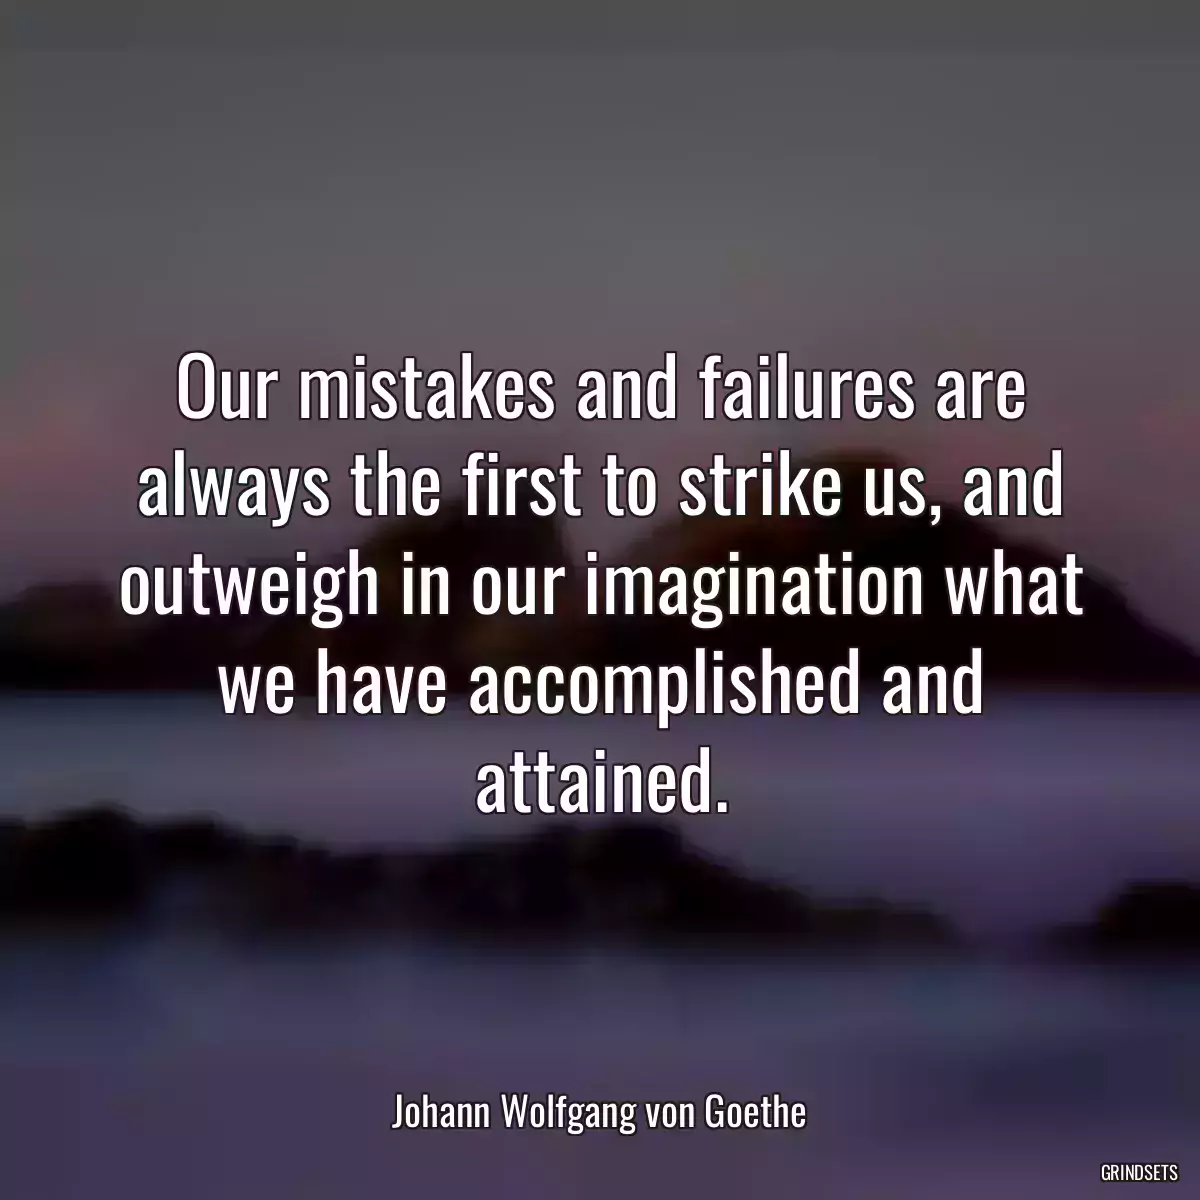 Our mistakes and failures are always the first to strike us, and outweigh in our imagination what we have accomplished and attained.